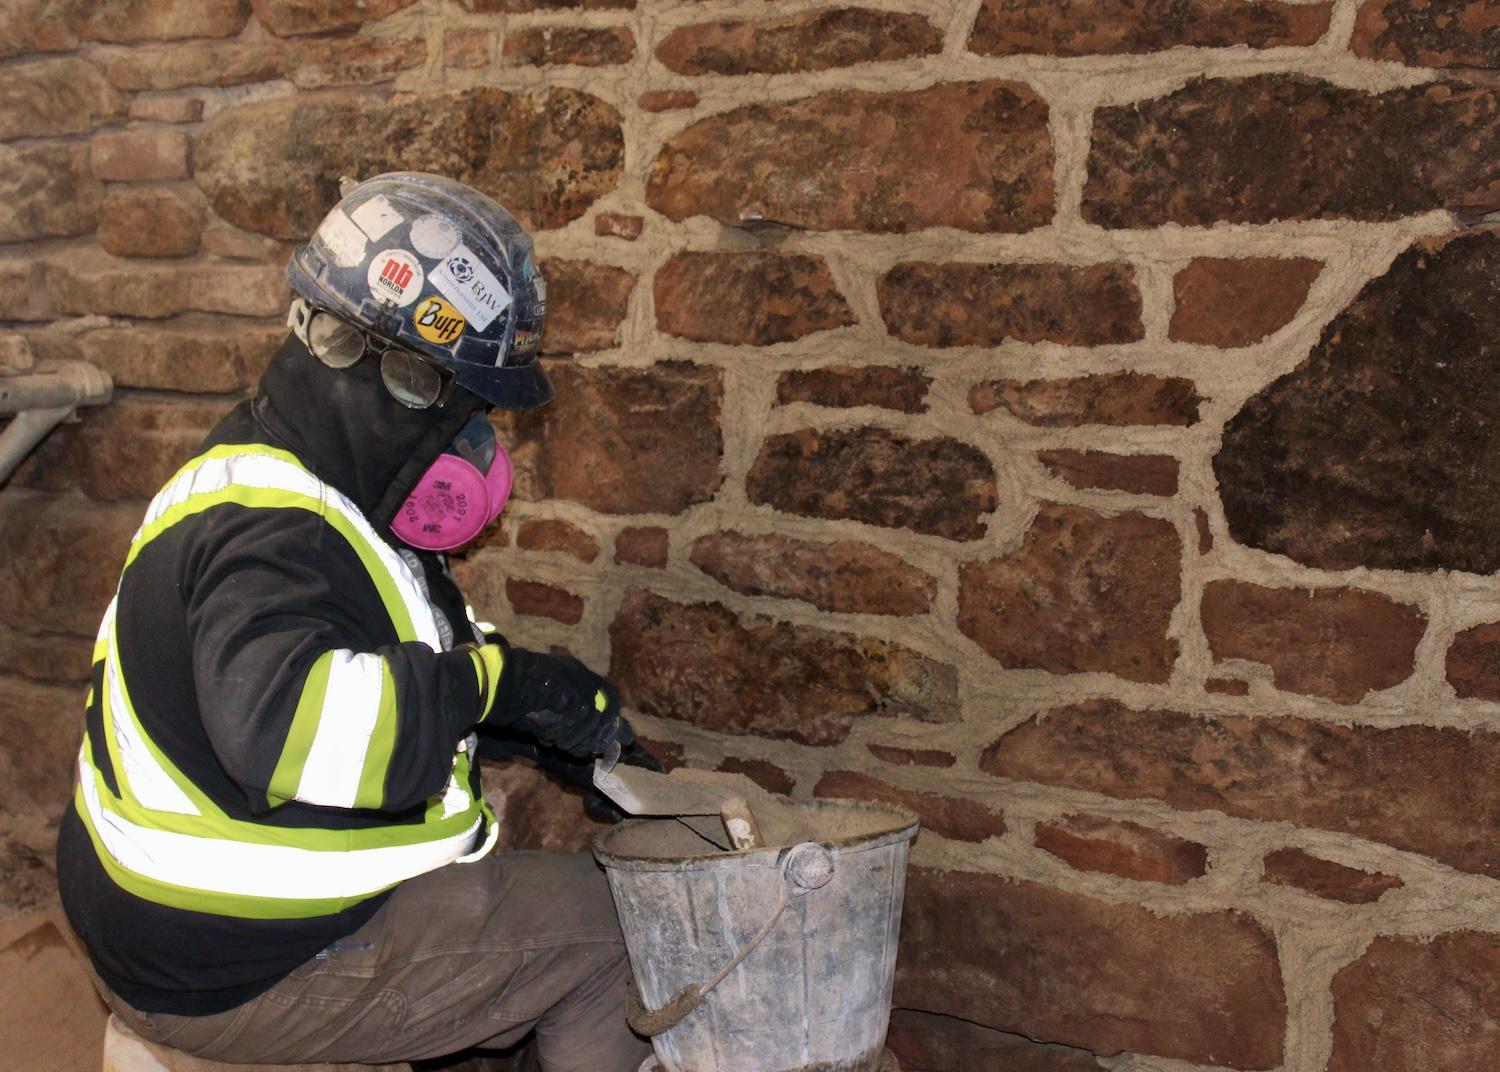 A stonemason works on stones, below grade of Province House National Historic Site.